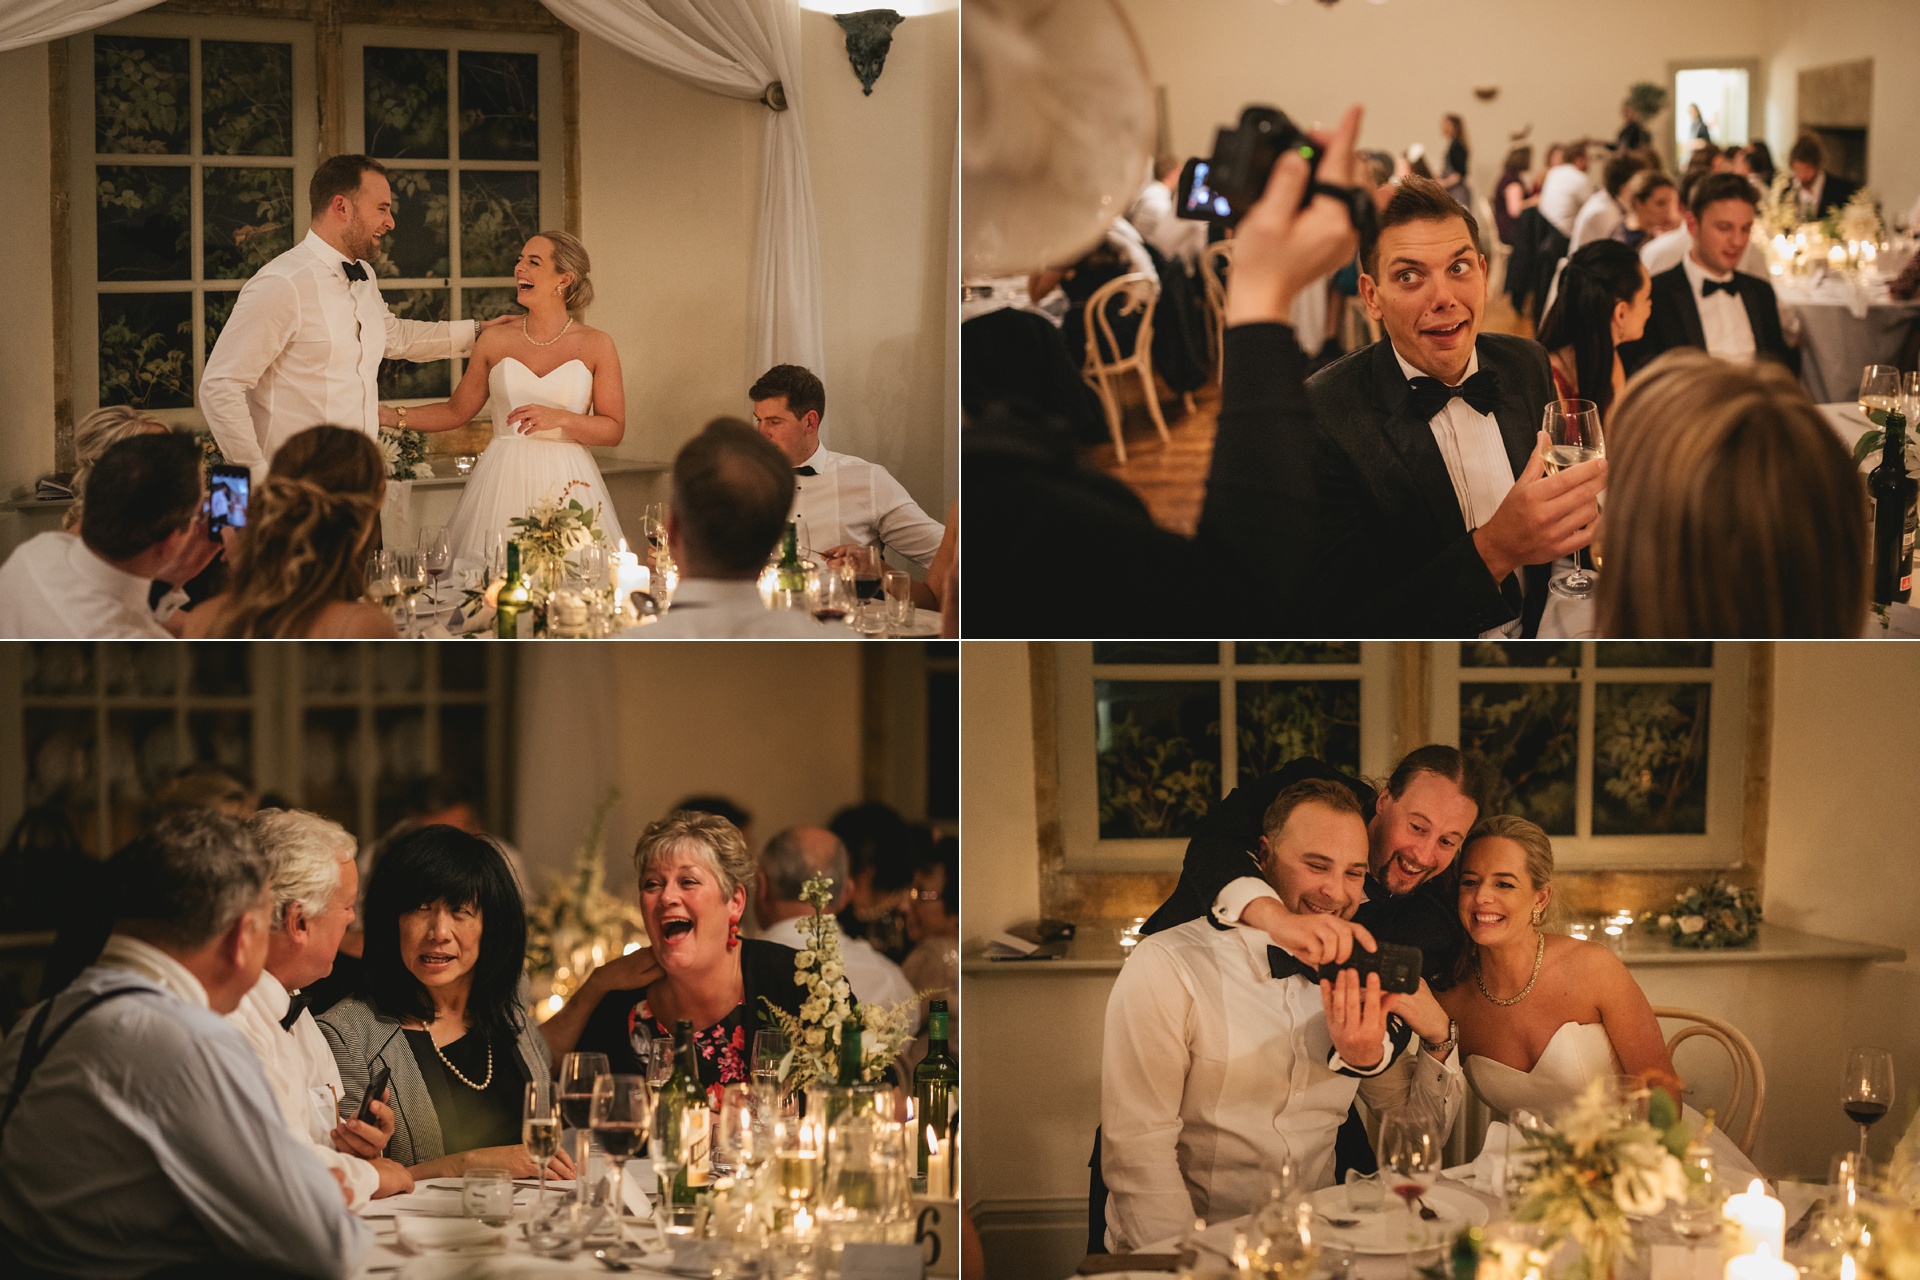 Different images of guests enjoying the wedding breakfast